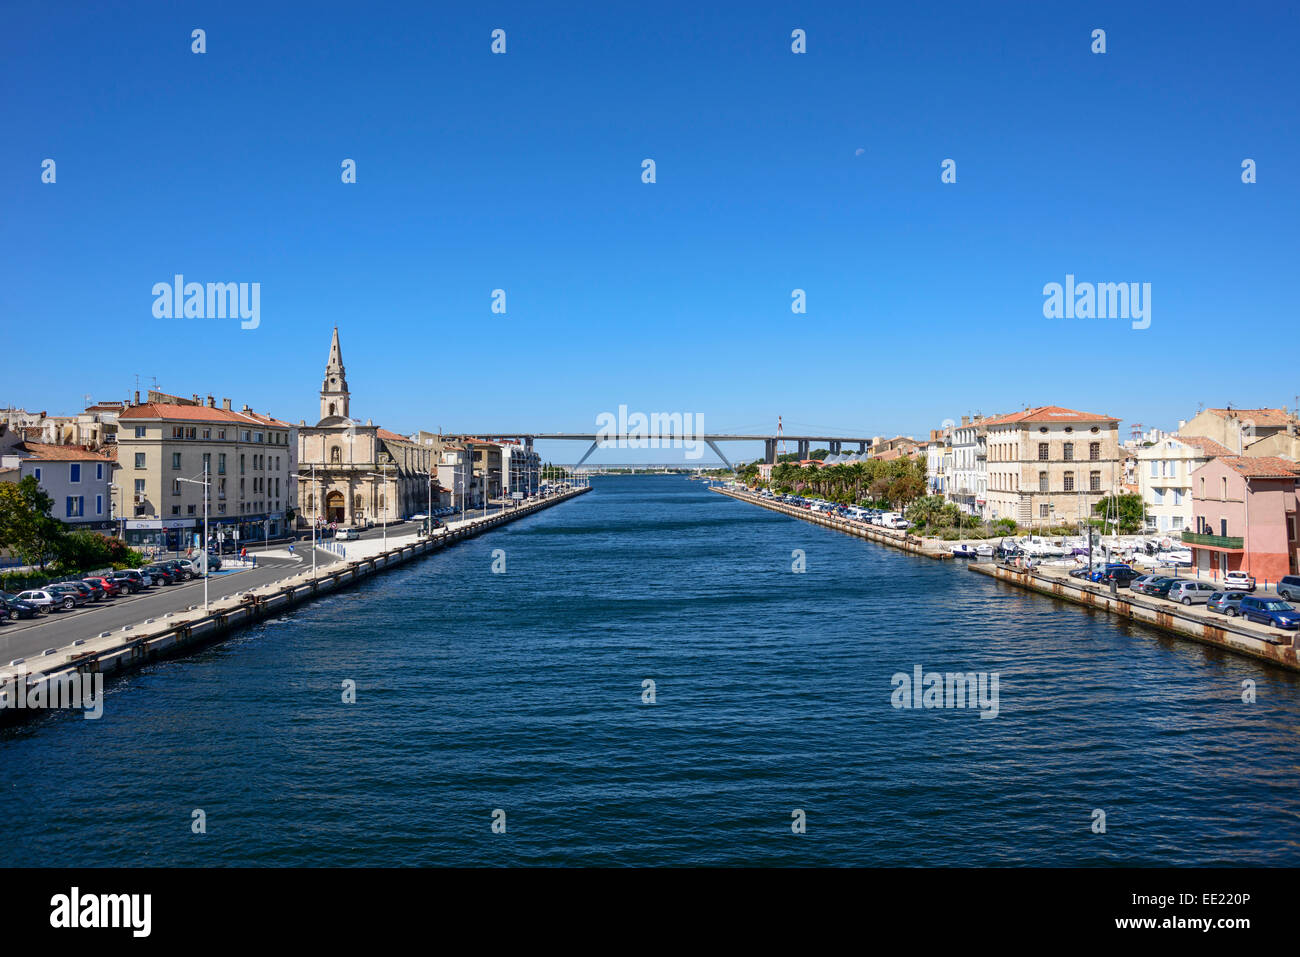 View of Martigues with A55 Highway in the background, Bouches du Rhone, PACA (Provence-Alpes-Cote d'Azur), France Stock Photo